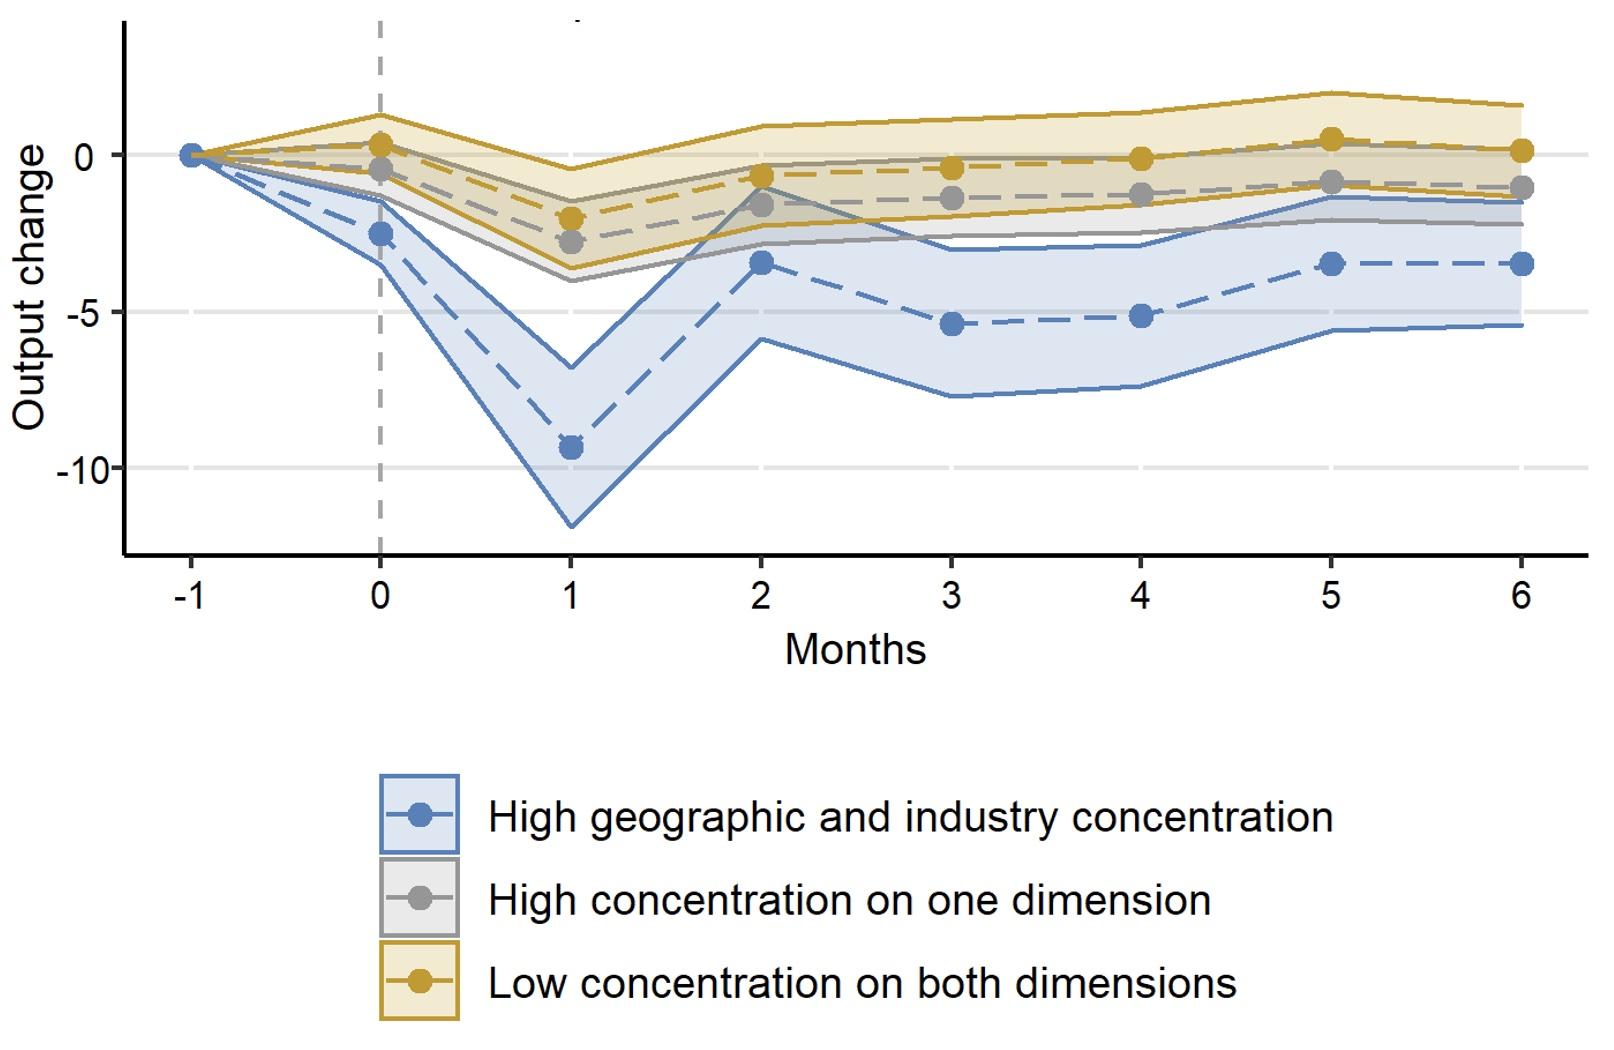 Figure 2 Supply chain concentration amplifies the output decline in response to a shock